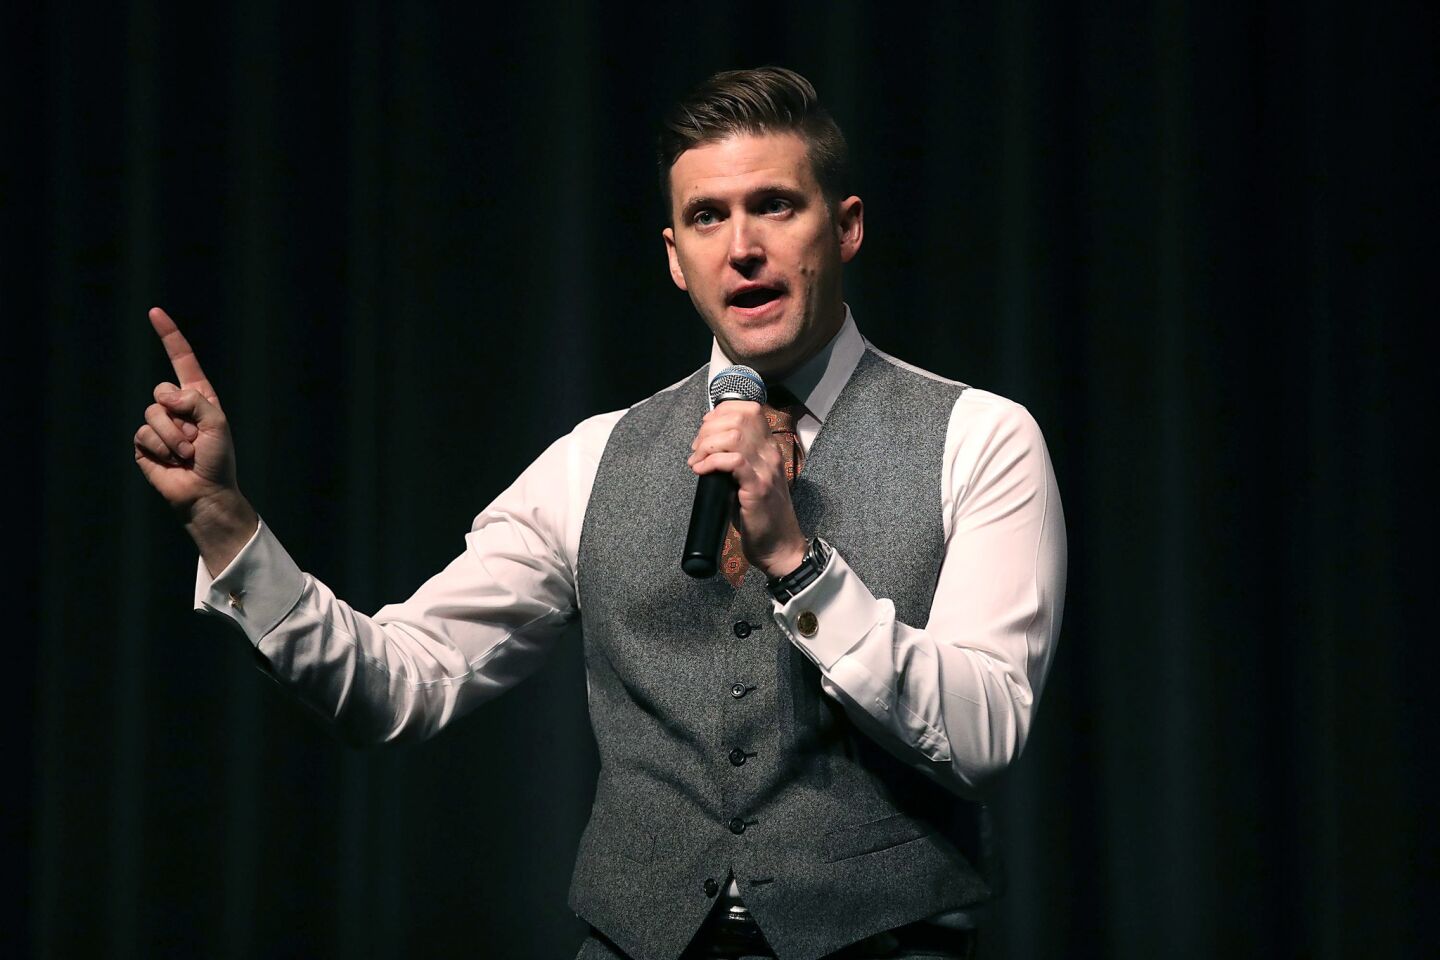 White nationalist Richard Spencer, who popularized the term "alt-right," speaks at the Curtis M. Phillips Center for the Performing Arts at the University of Florida in Gainesville on Thursday.